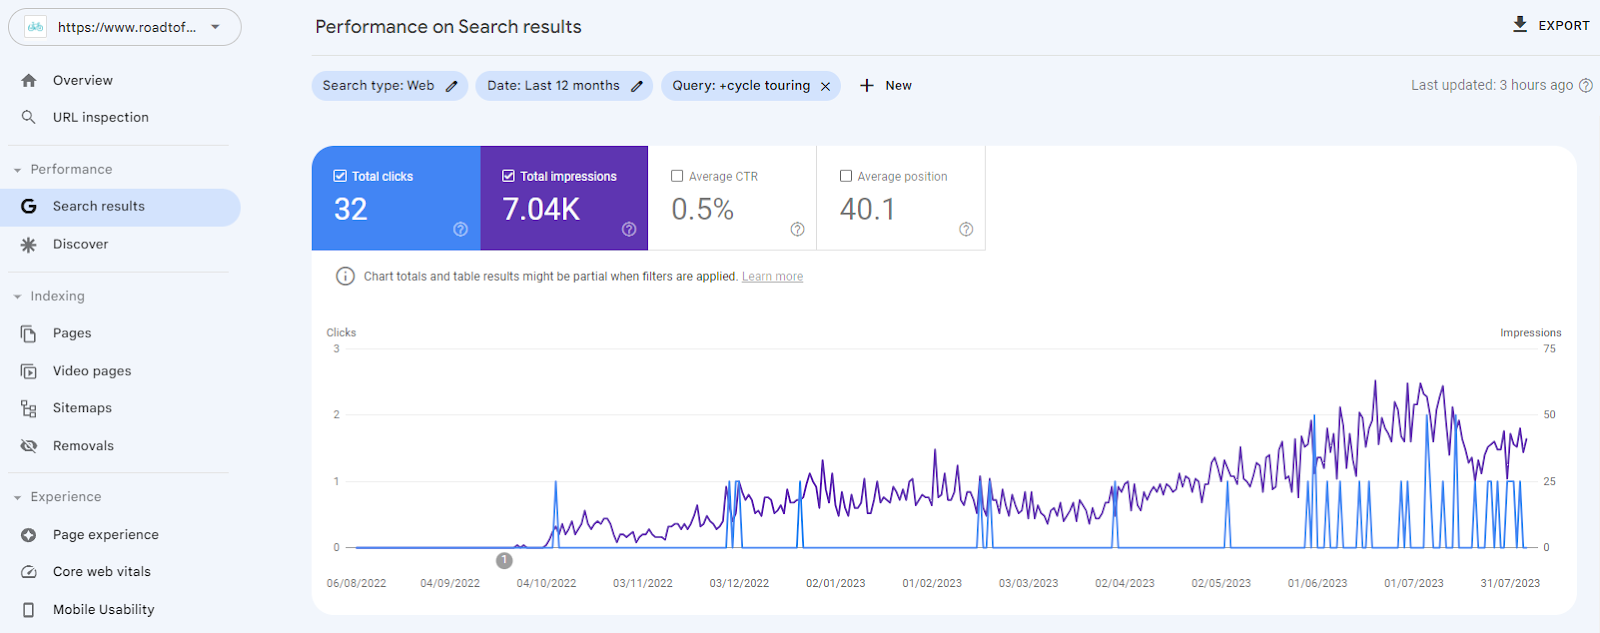 Screens،t from Google search console s،wing an upward trend of impressions. This demonstrates ،w topic aut،rity and content c،ers build website visibility